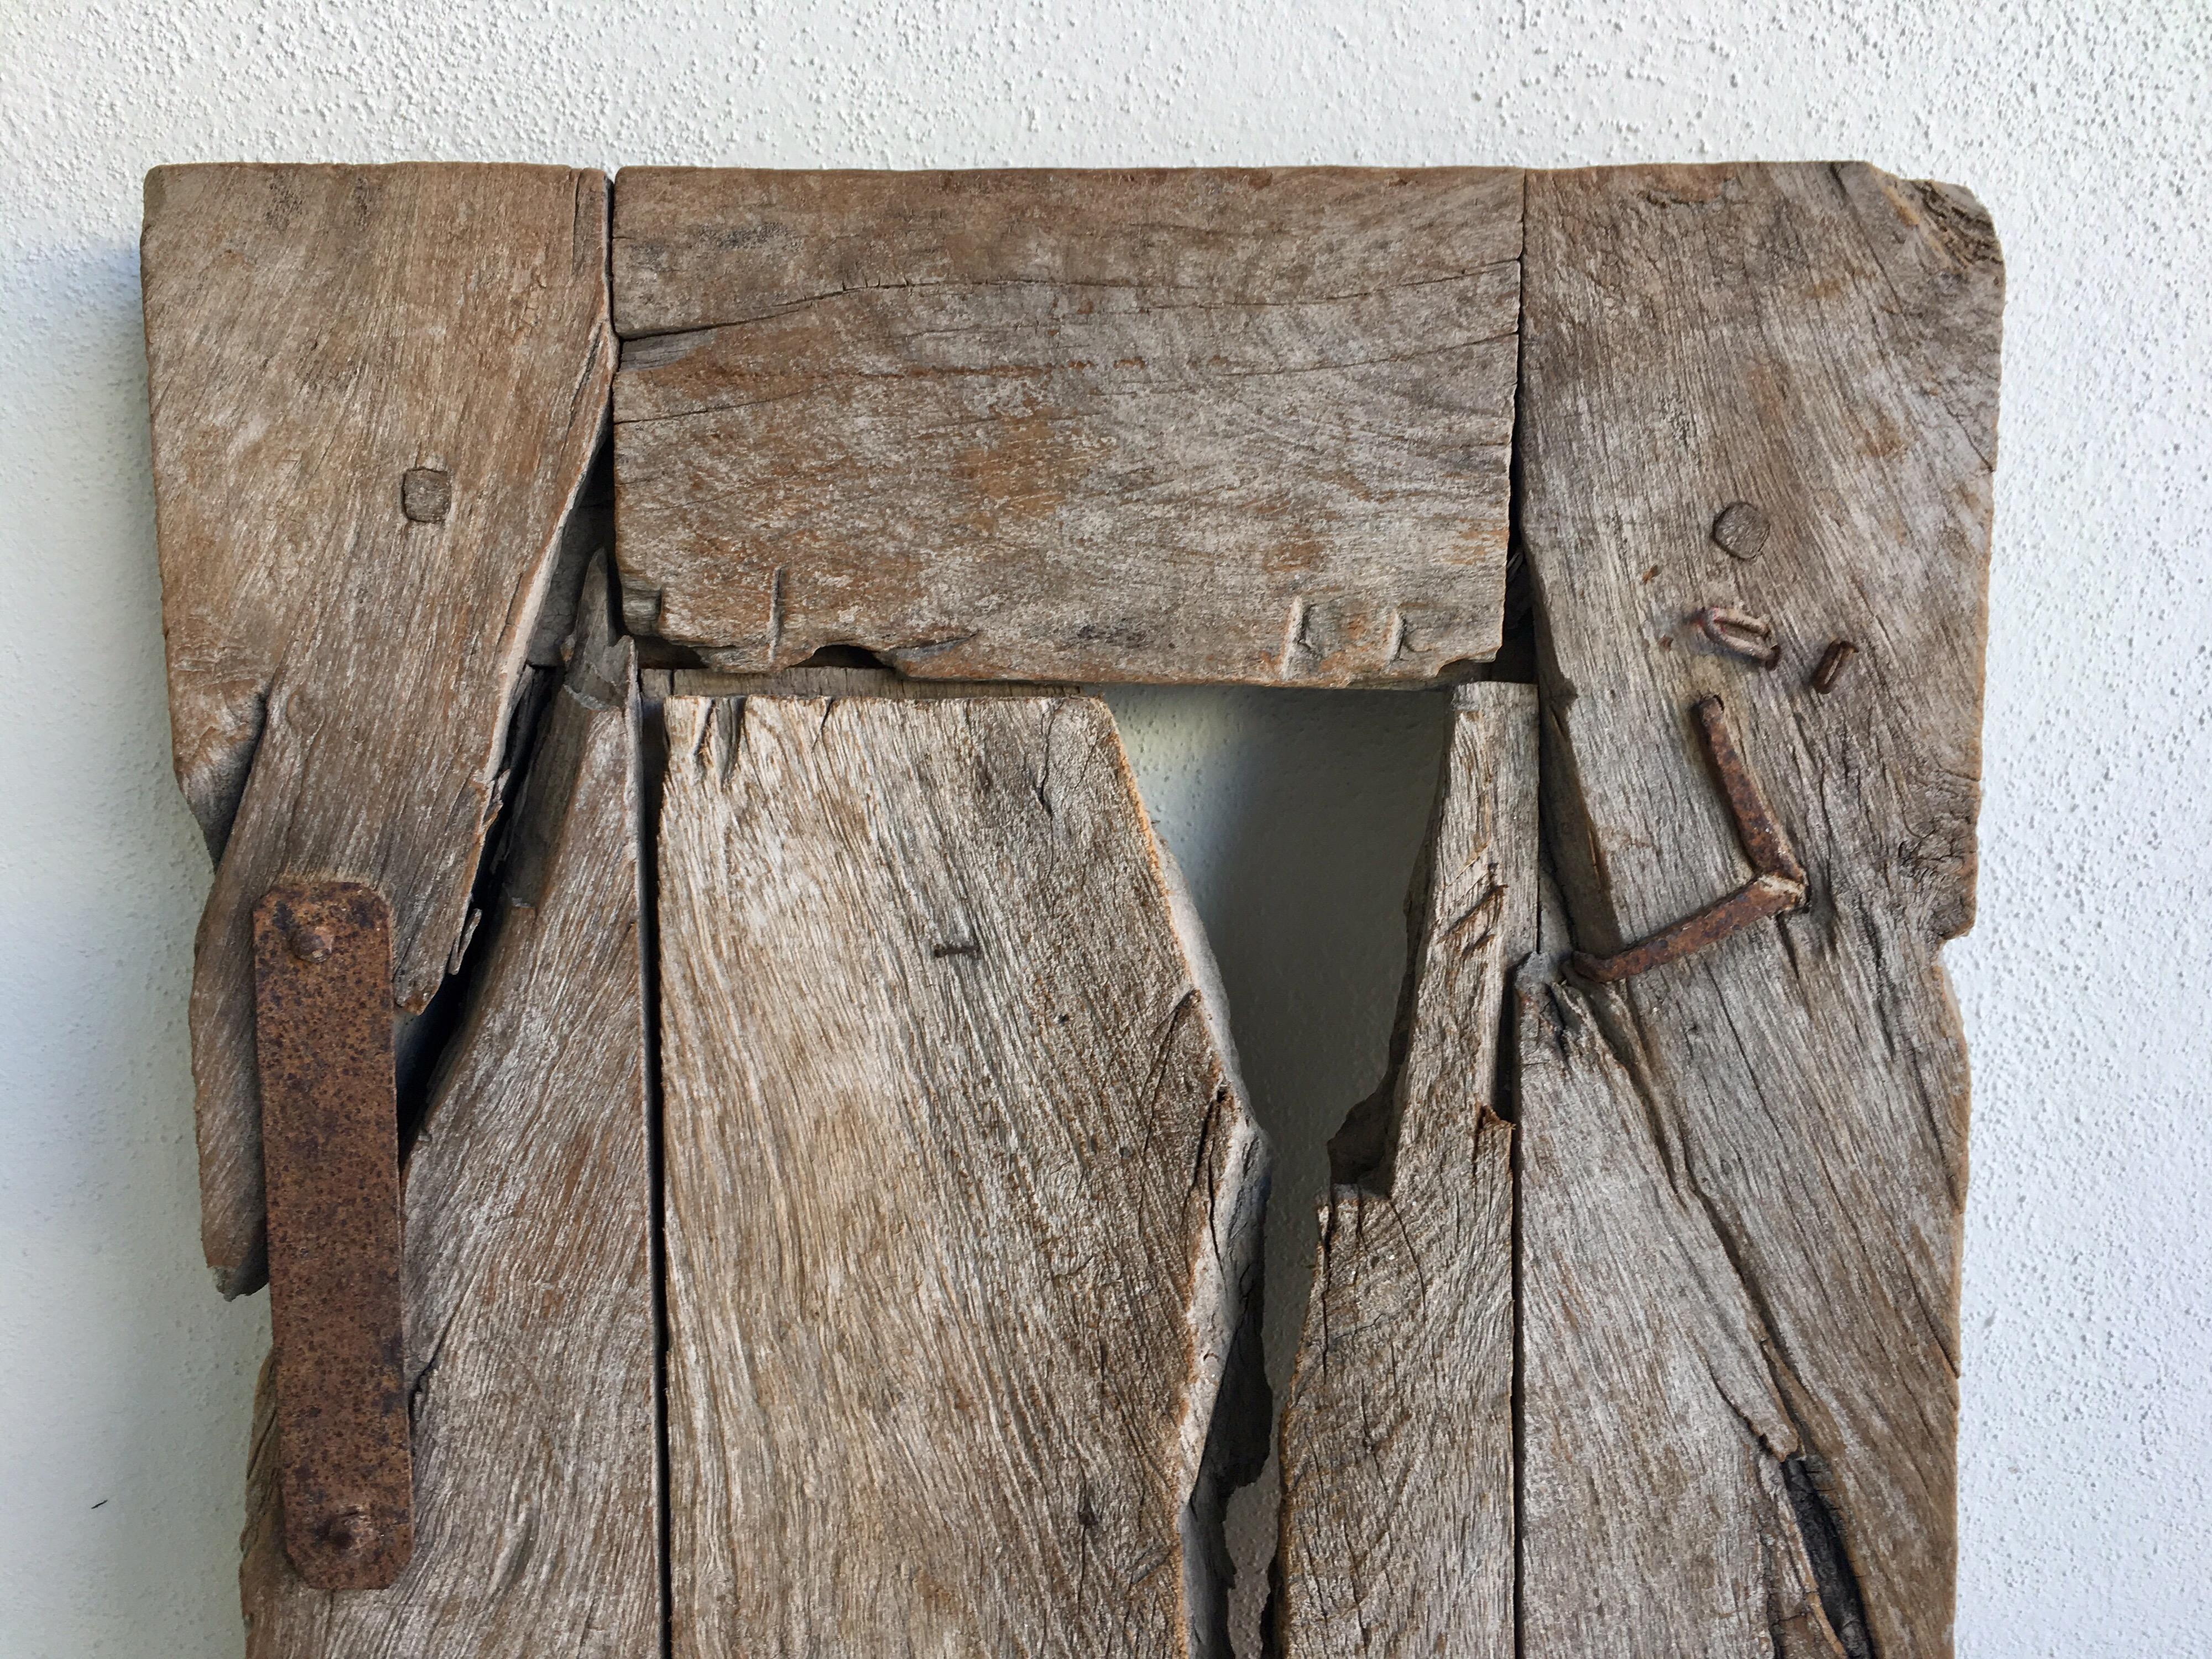 19th century colonial window in mesquite wood from the Sierra Gorda region of guanajuato. Original iron hardware with lock mechanism and hand forged iron nails, circa mid-1800s.